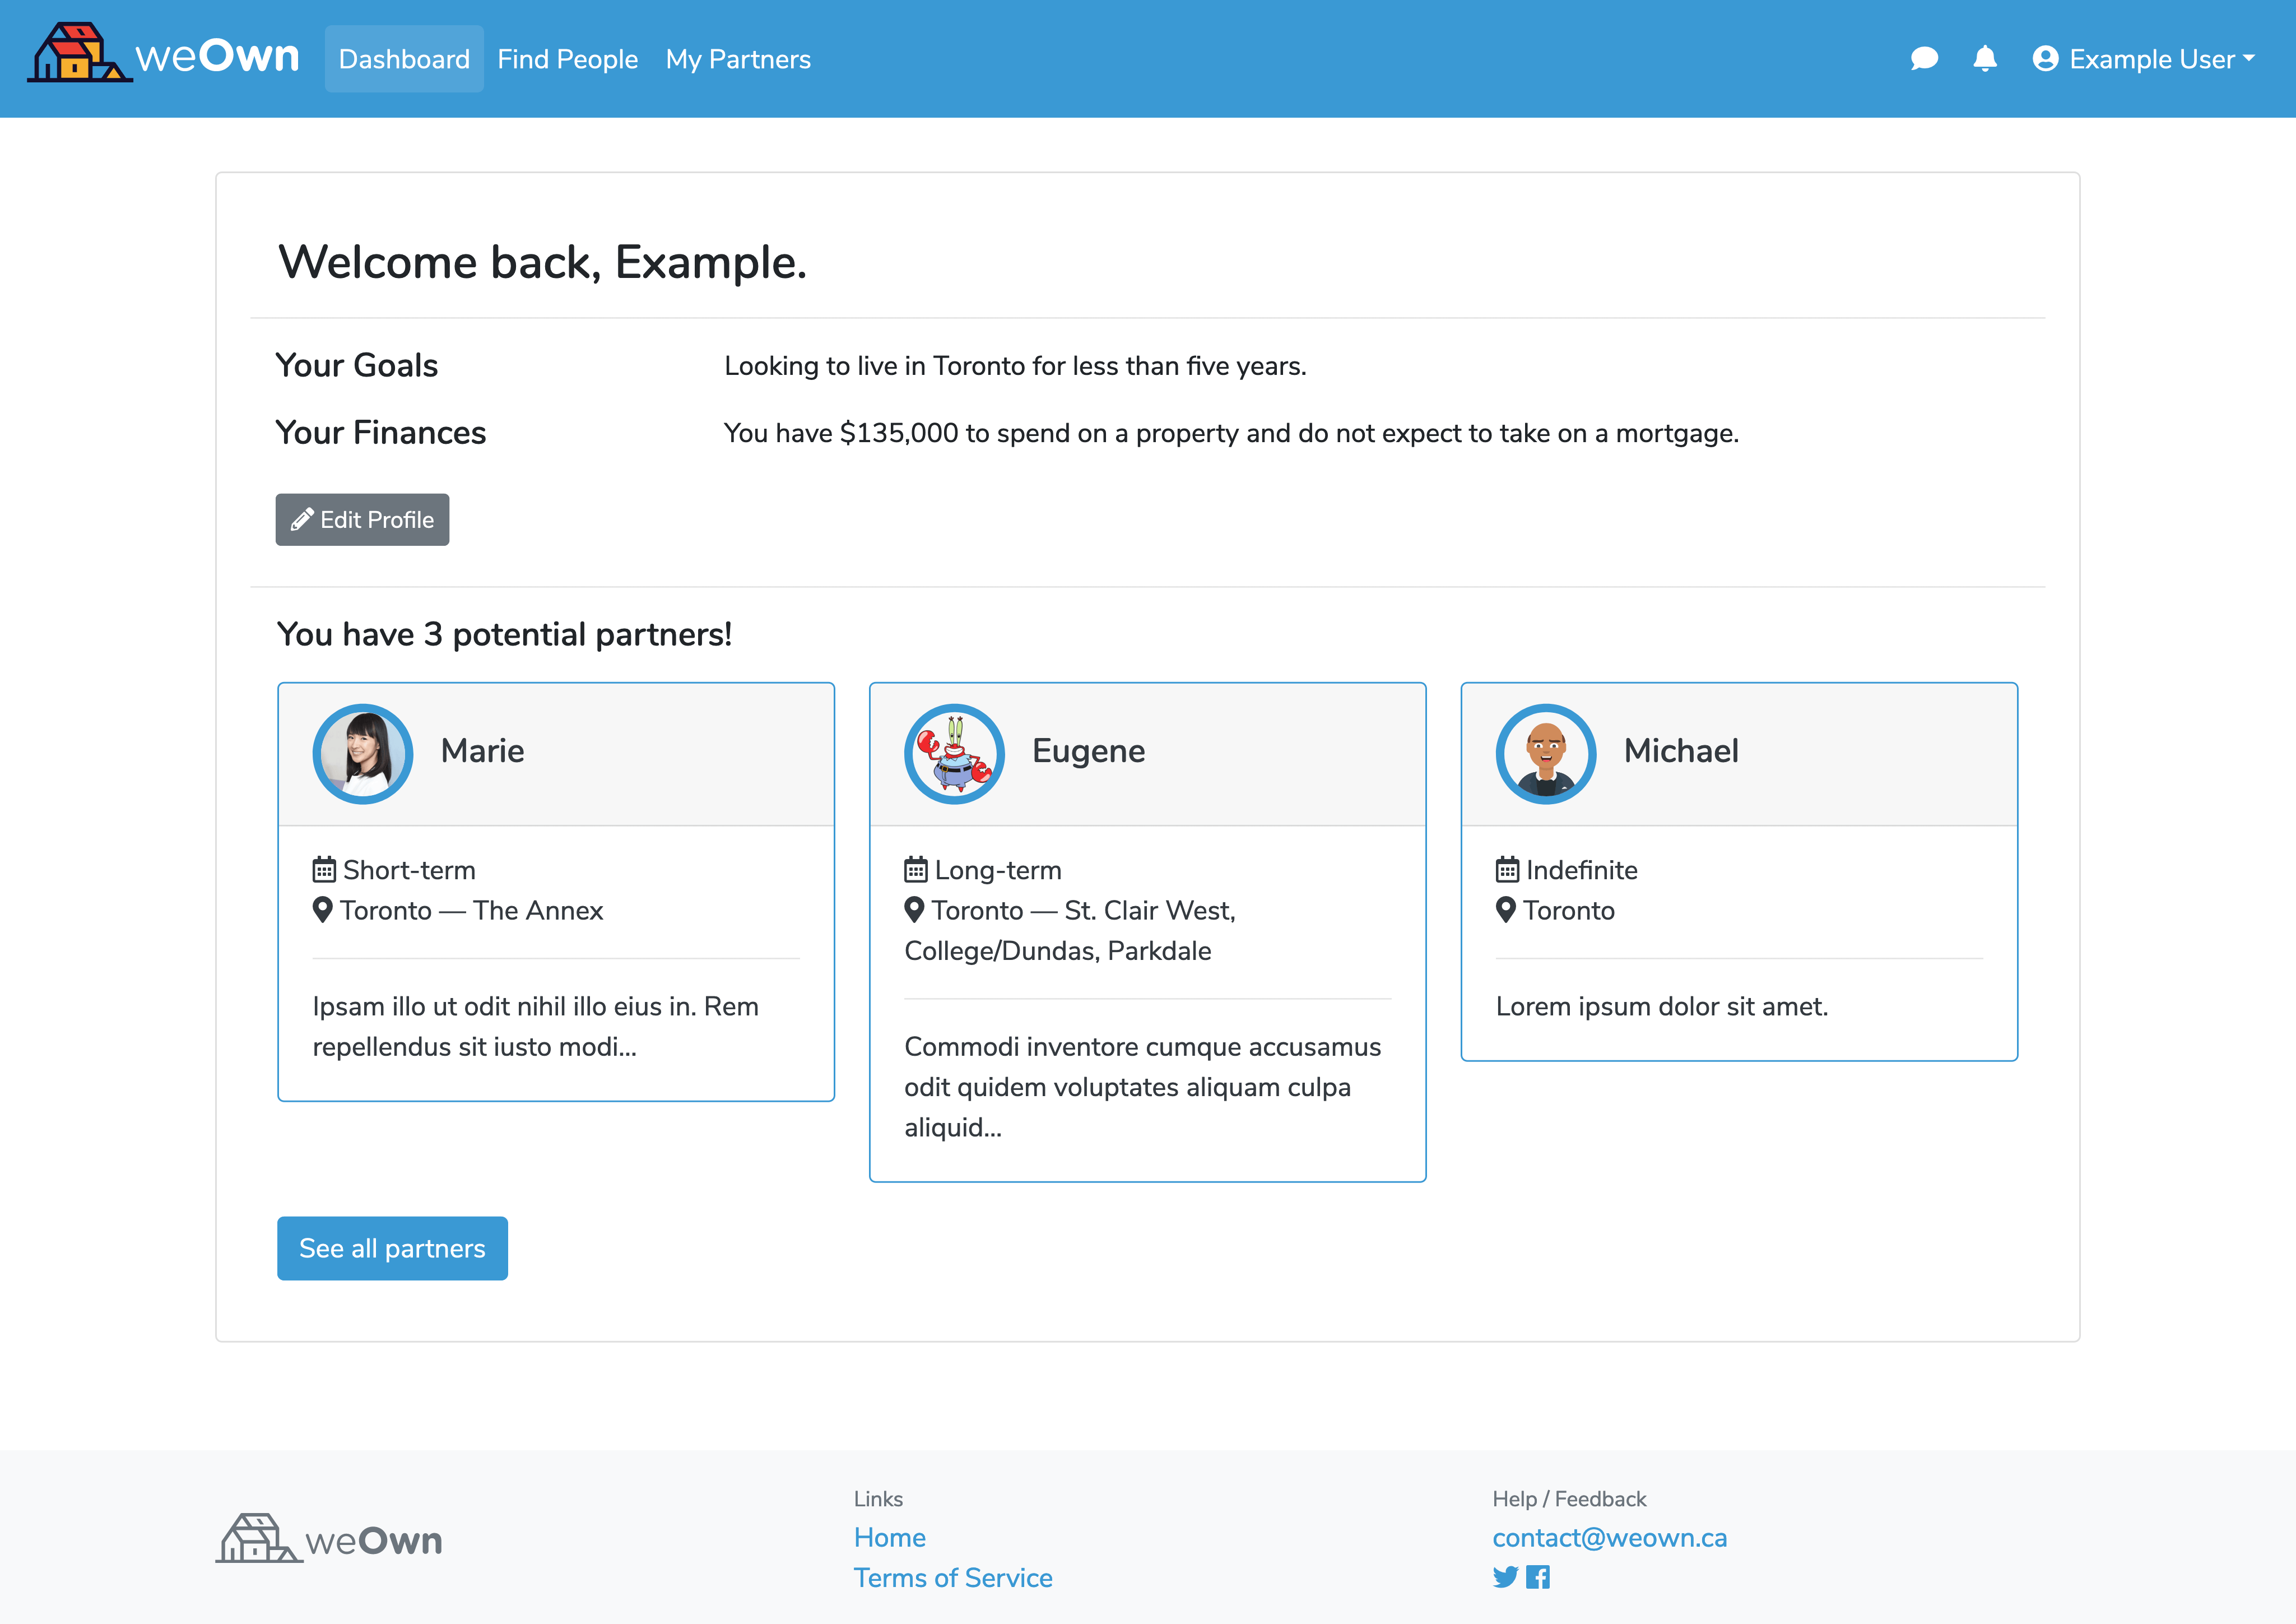 Dashboard page showing welcome message, profile information, and three potential partners